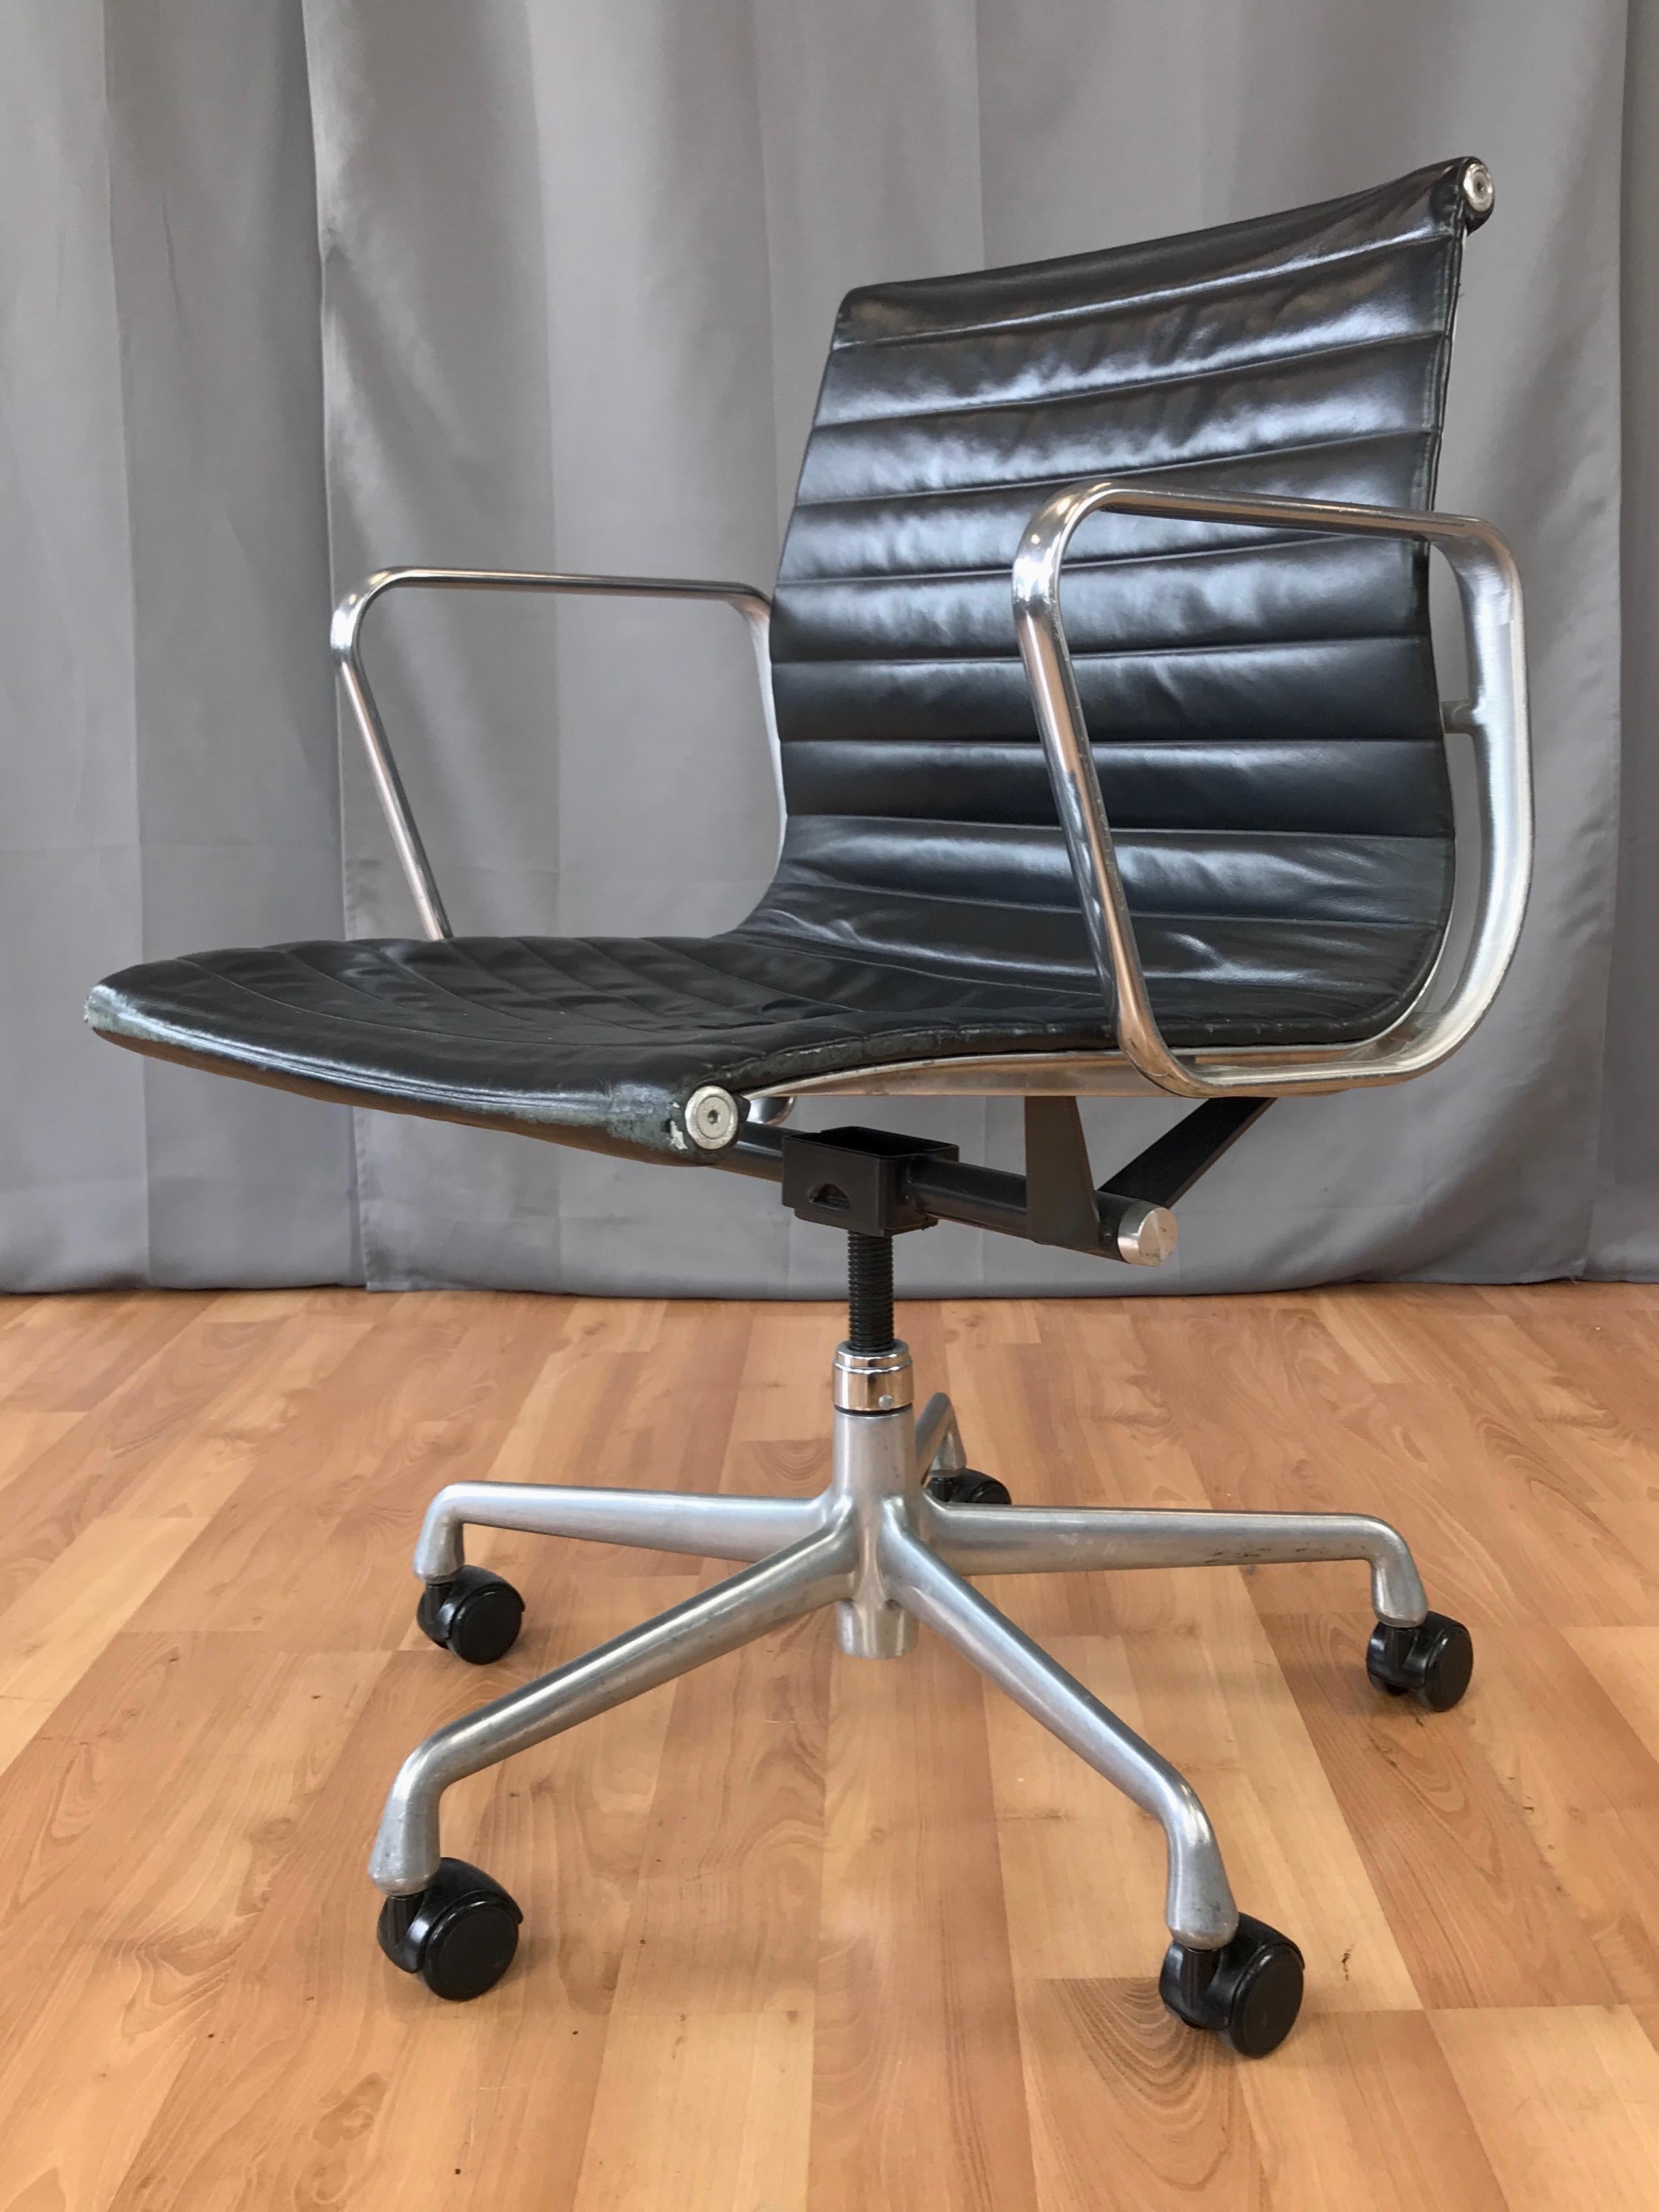 A special limited edition 50th Anniversary black leather Aluminum Group Management Chair by Charles and Ray Eames for Herman Miller, designed in 1958 and produced in 2008.

A Mid-Century Modern design icon, with clean lines and Minimalist cast